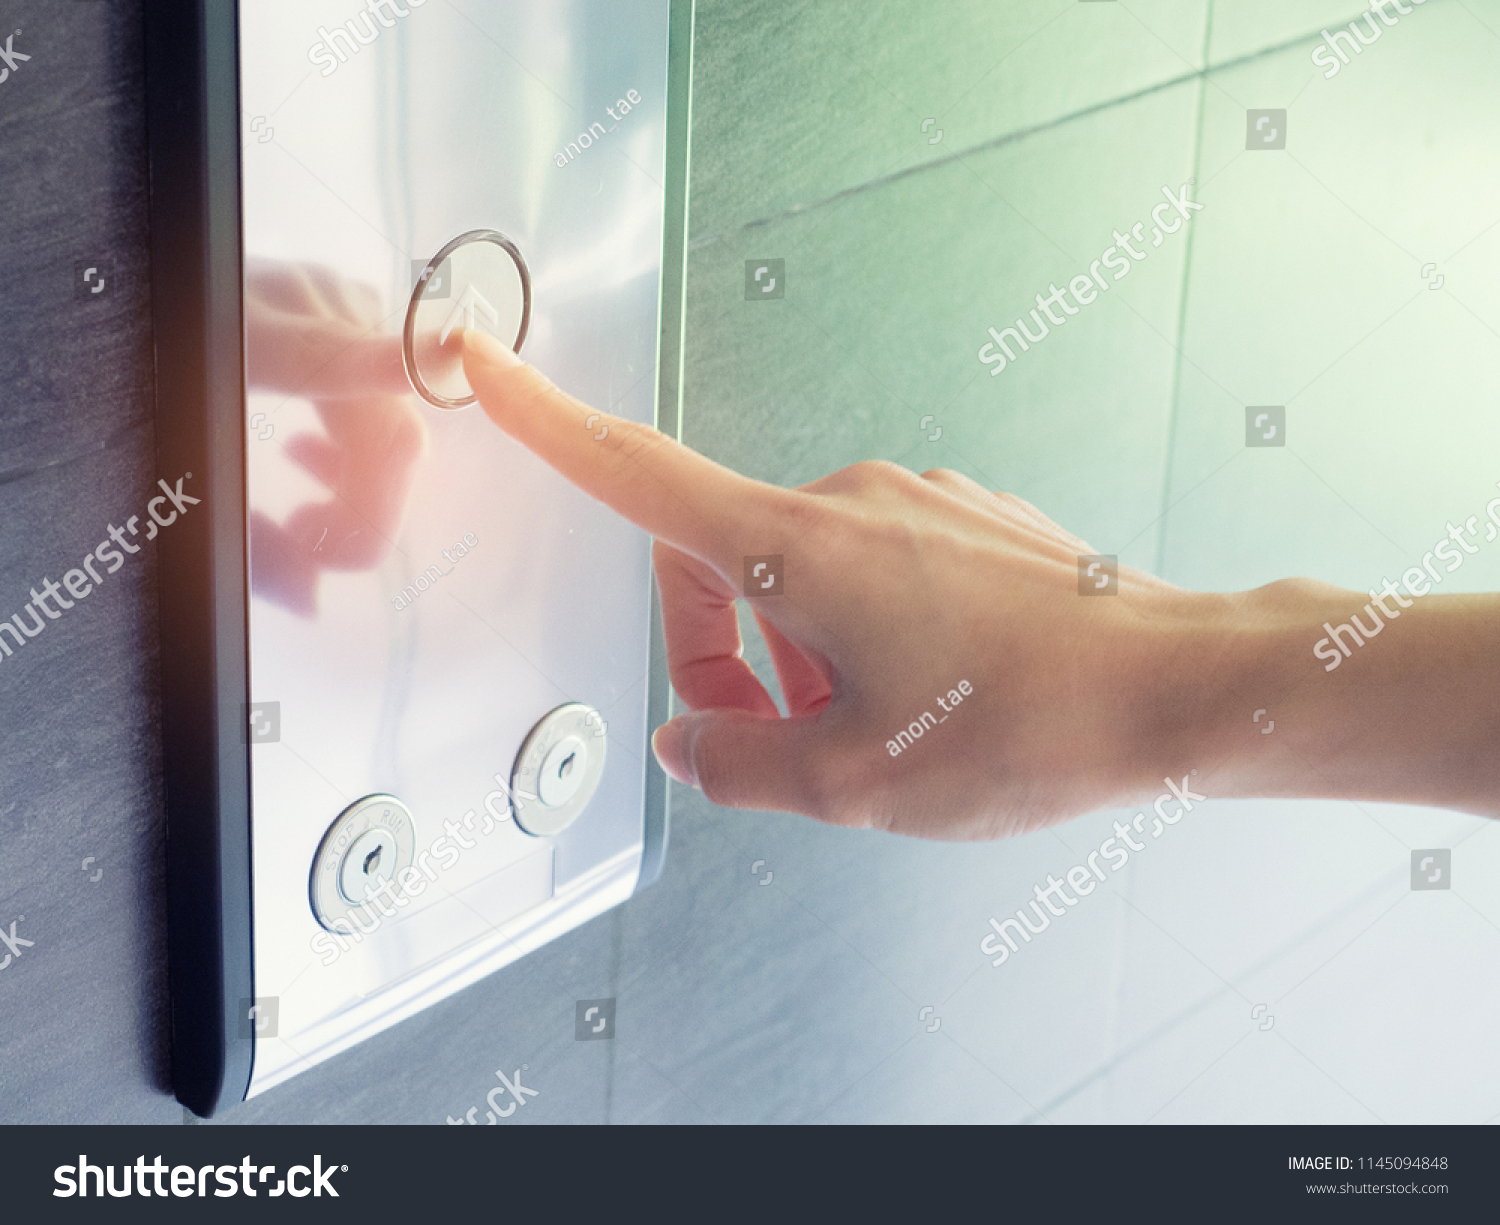 finger presses the elevator button,up and down button.woman pressing elevator button. finger presses the elevator button. #1145094848